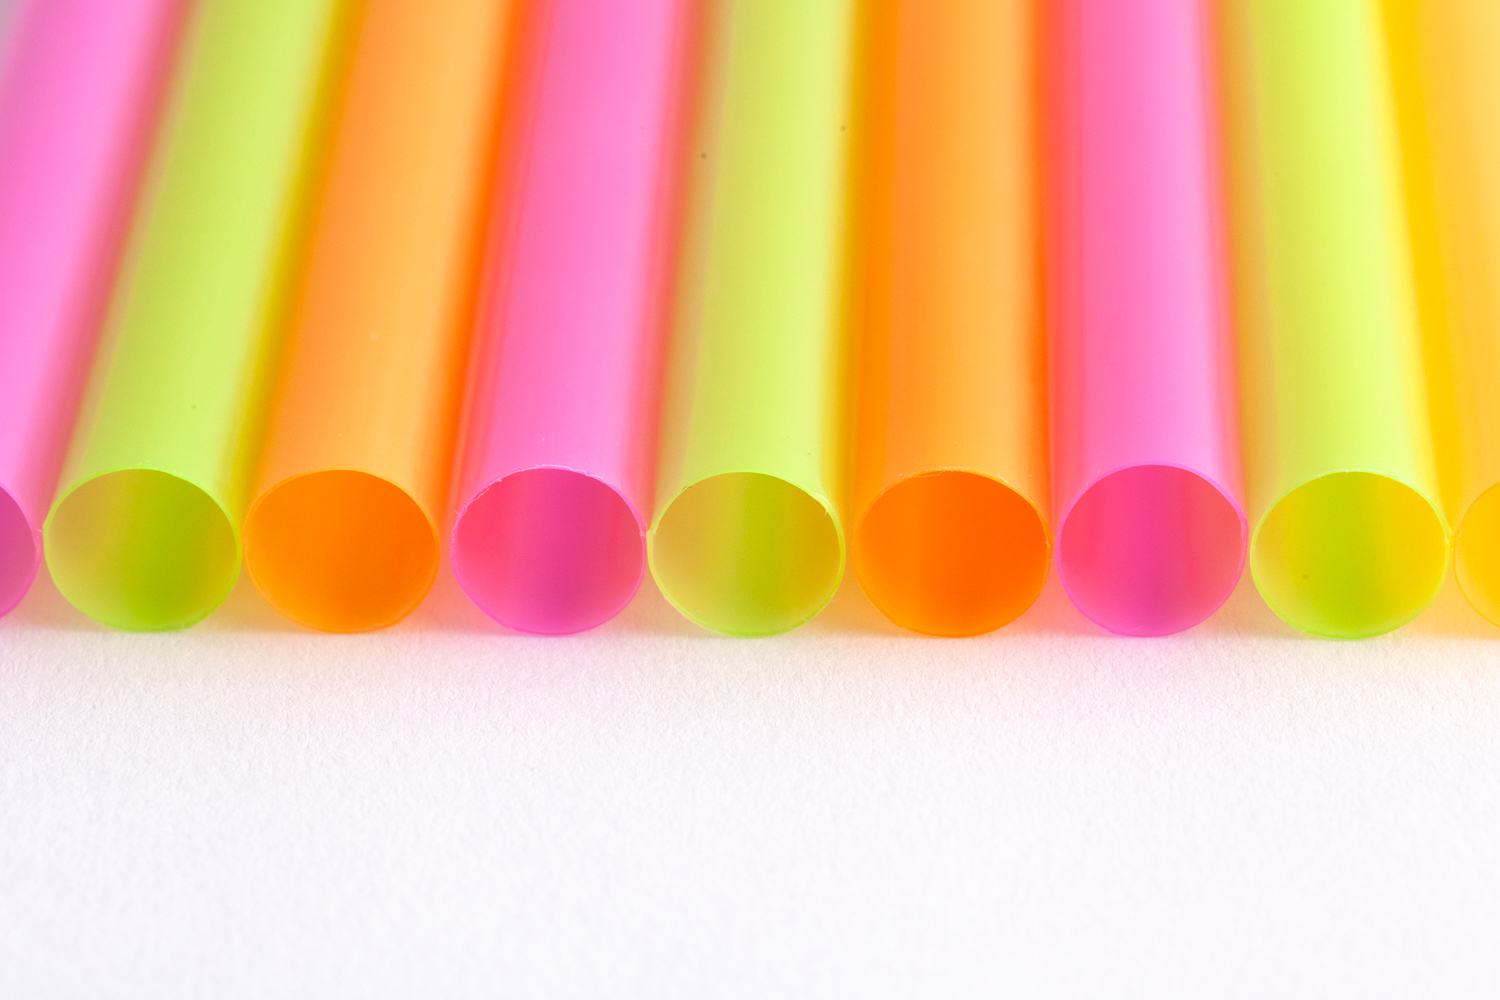 zoomed in on row of multicoloured plastic straws